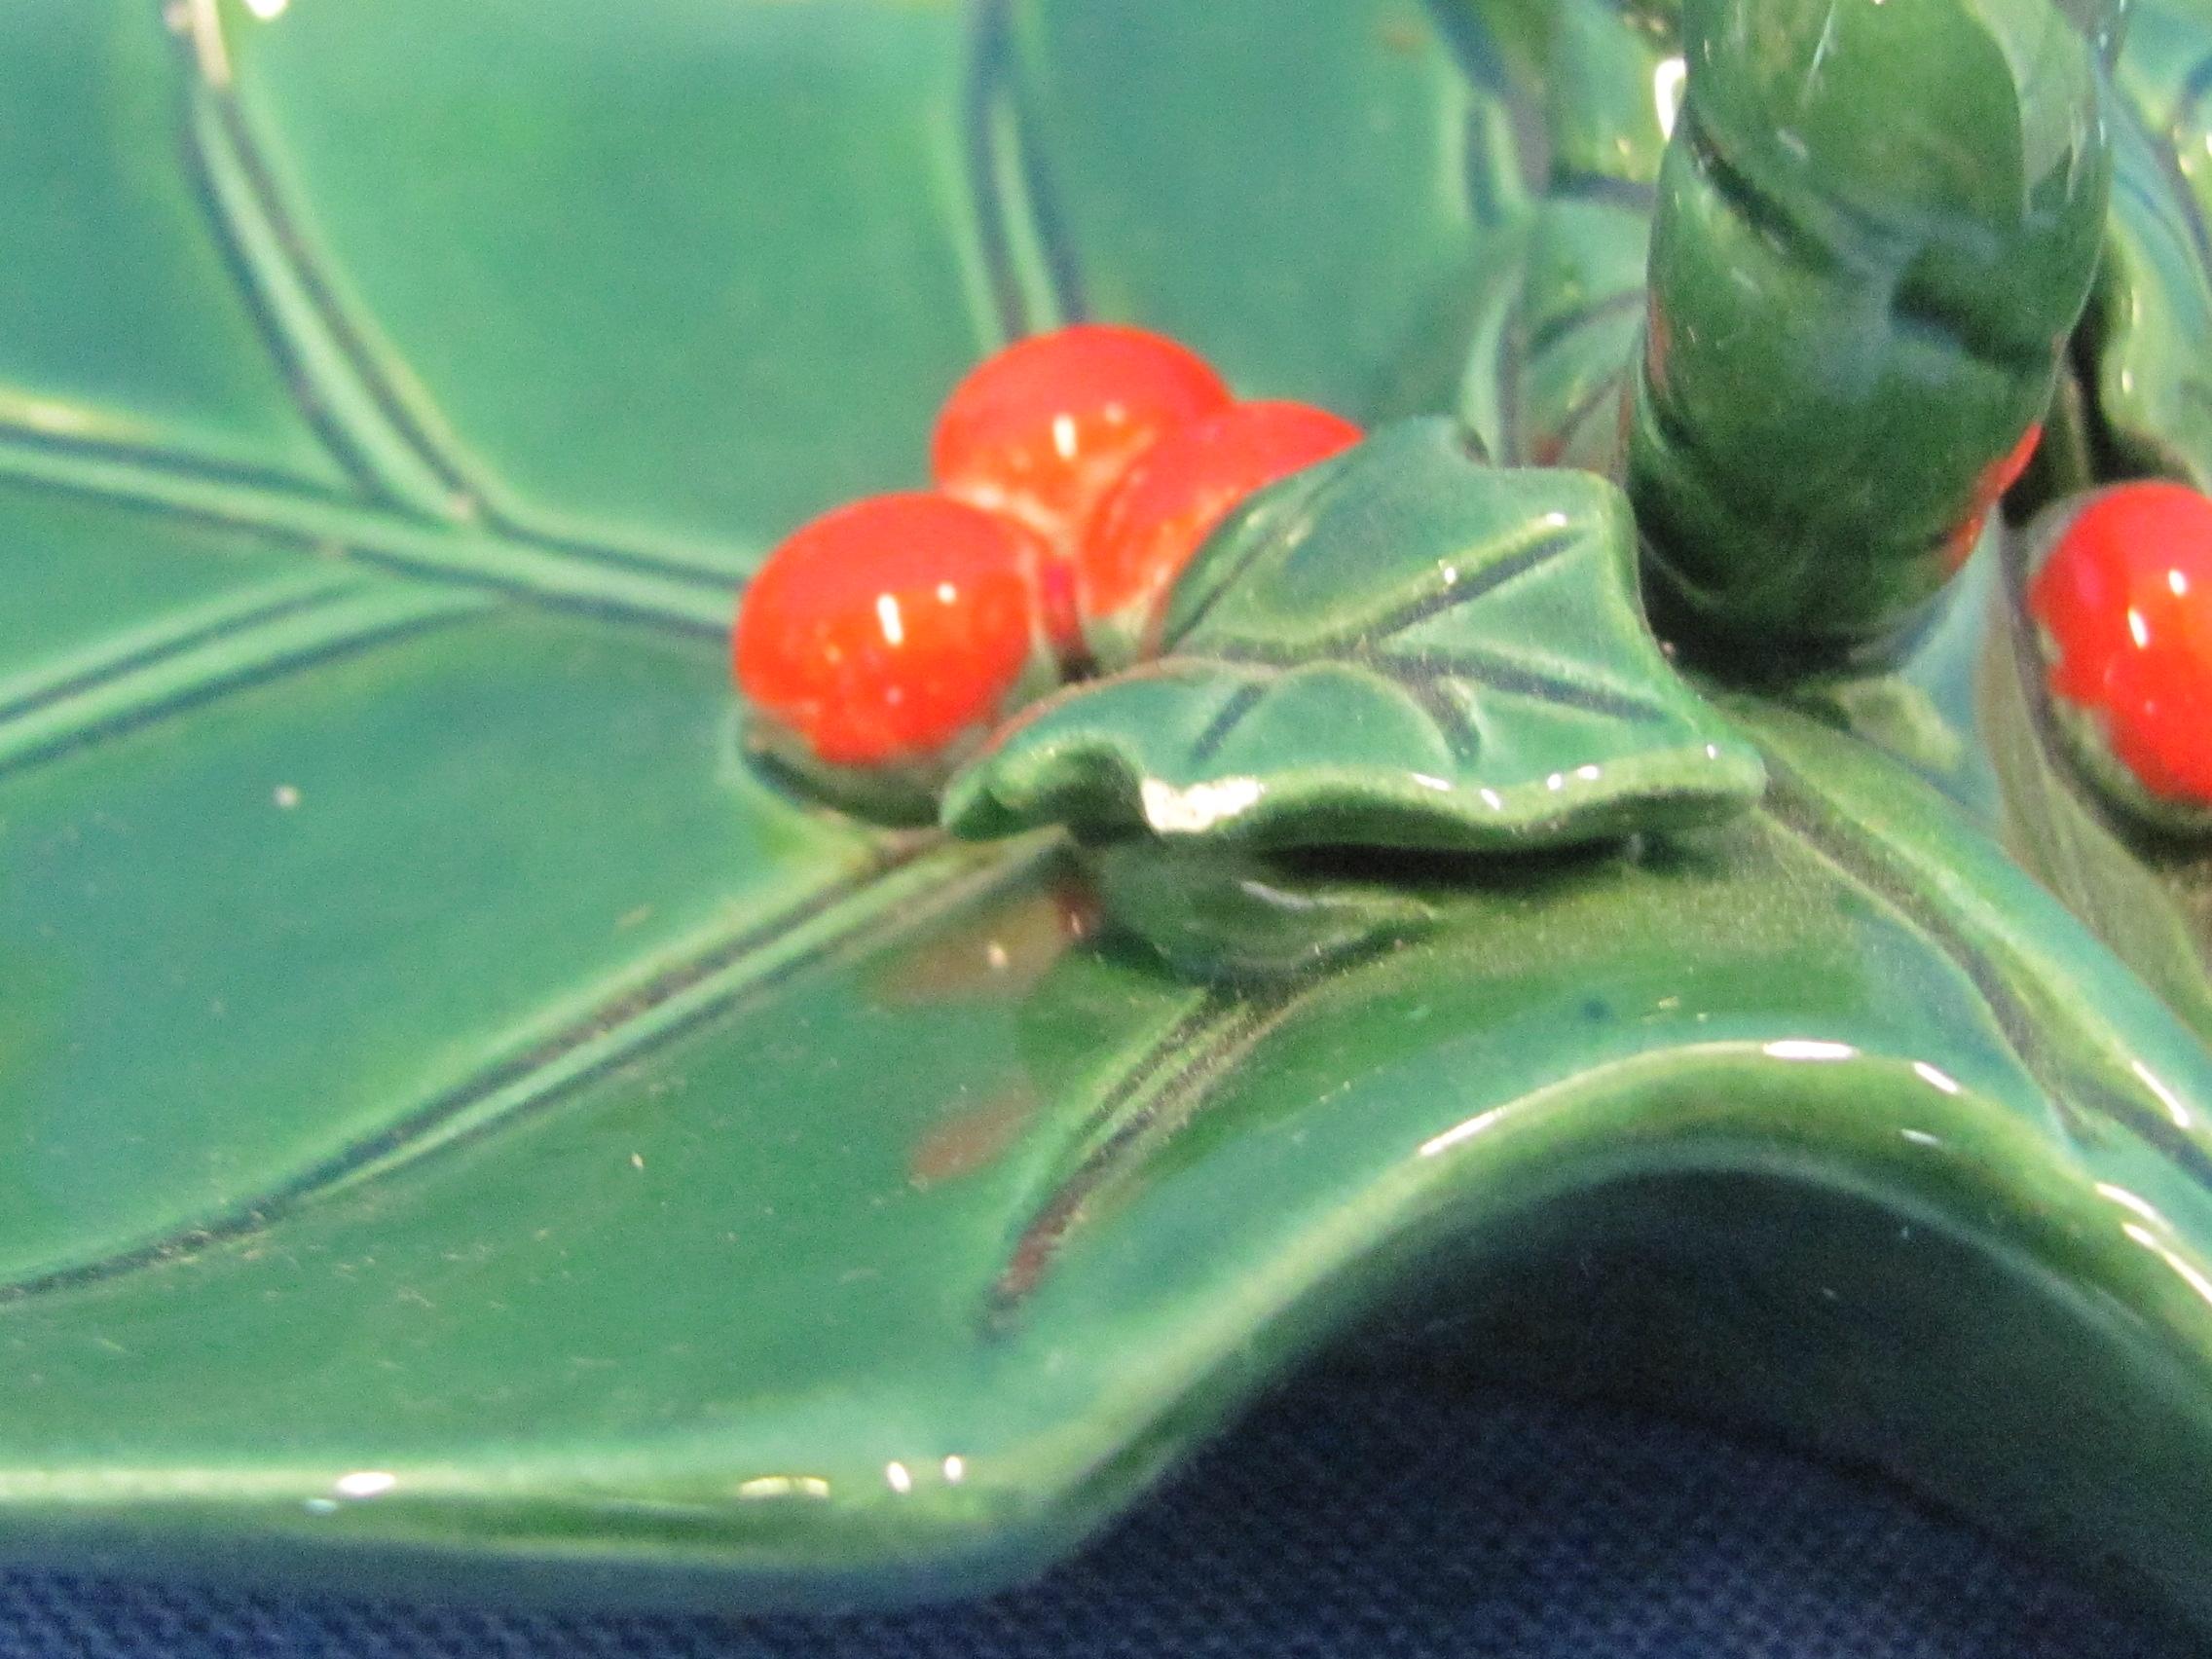 Vintage Lefton Green Holly Relish Tray & Pair of Candle Holders + Bone China Salt/Pepper Shakers